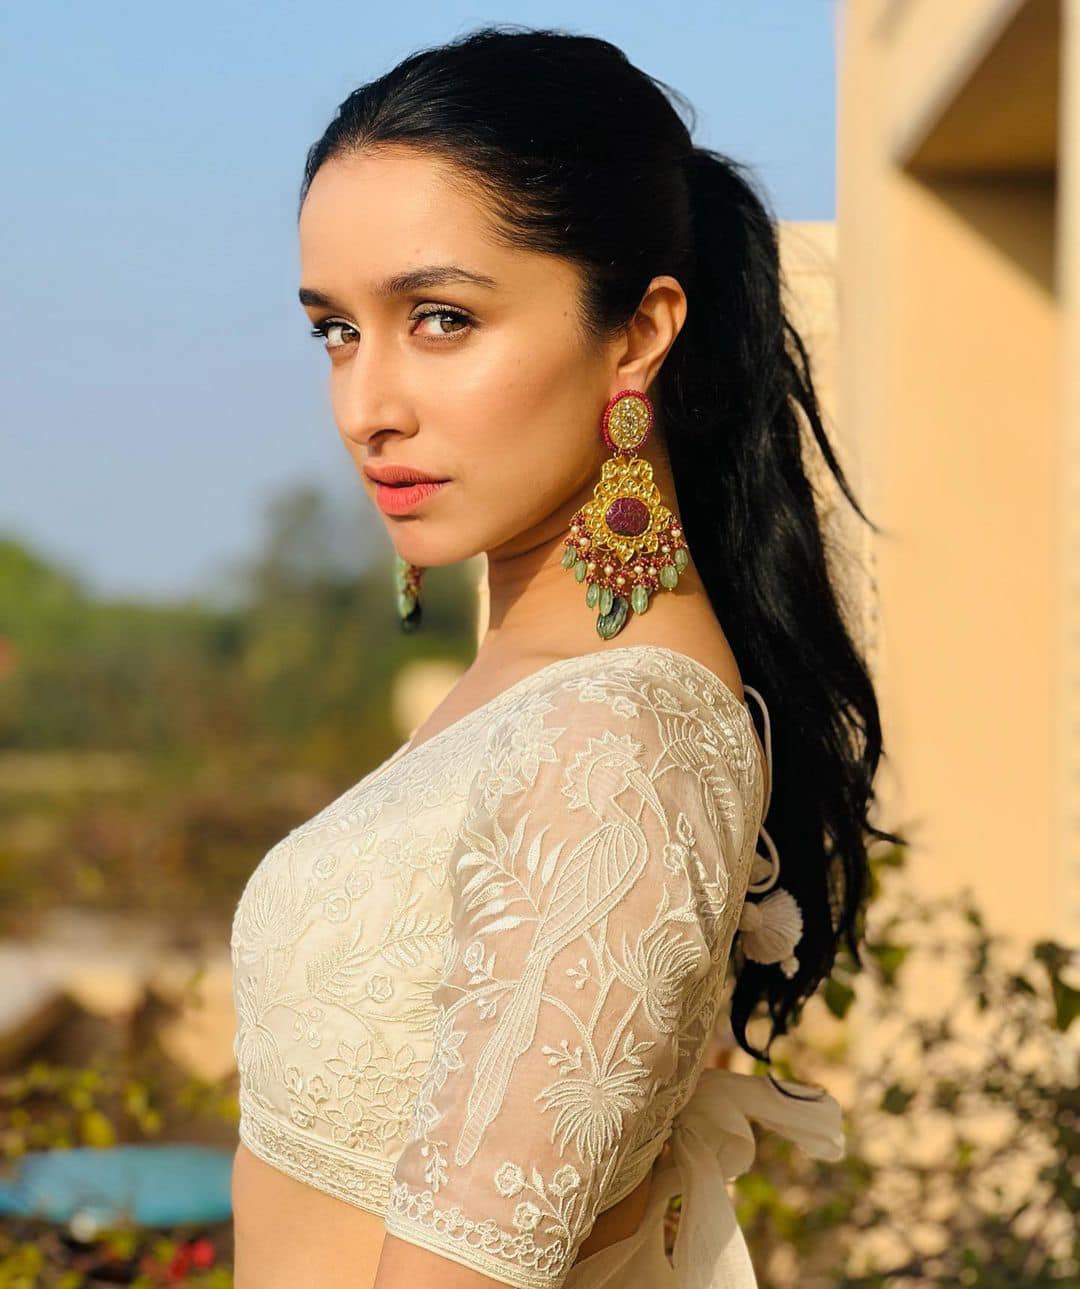 shraddha kapoor height in feet without shoes